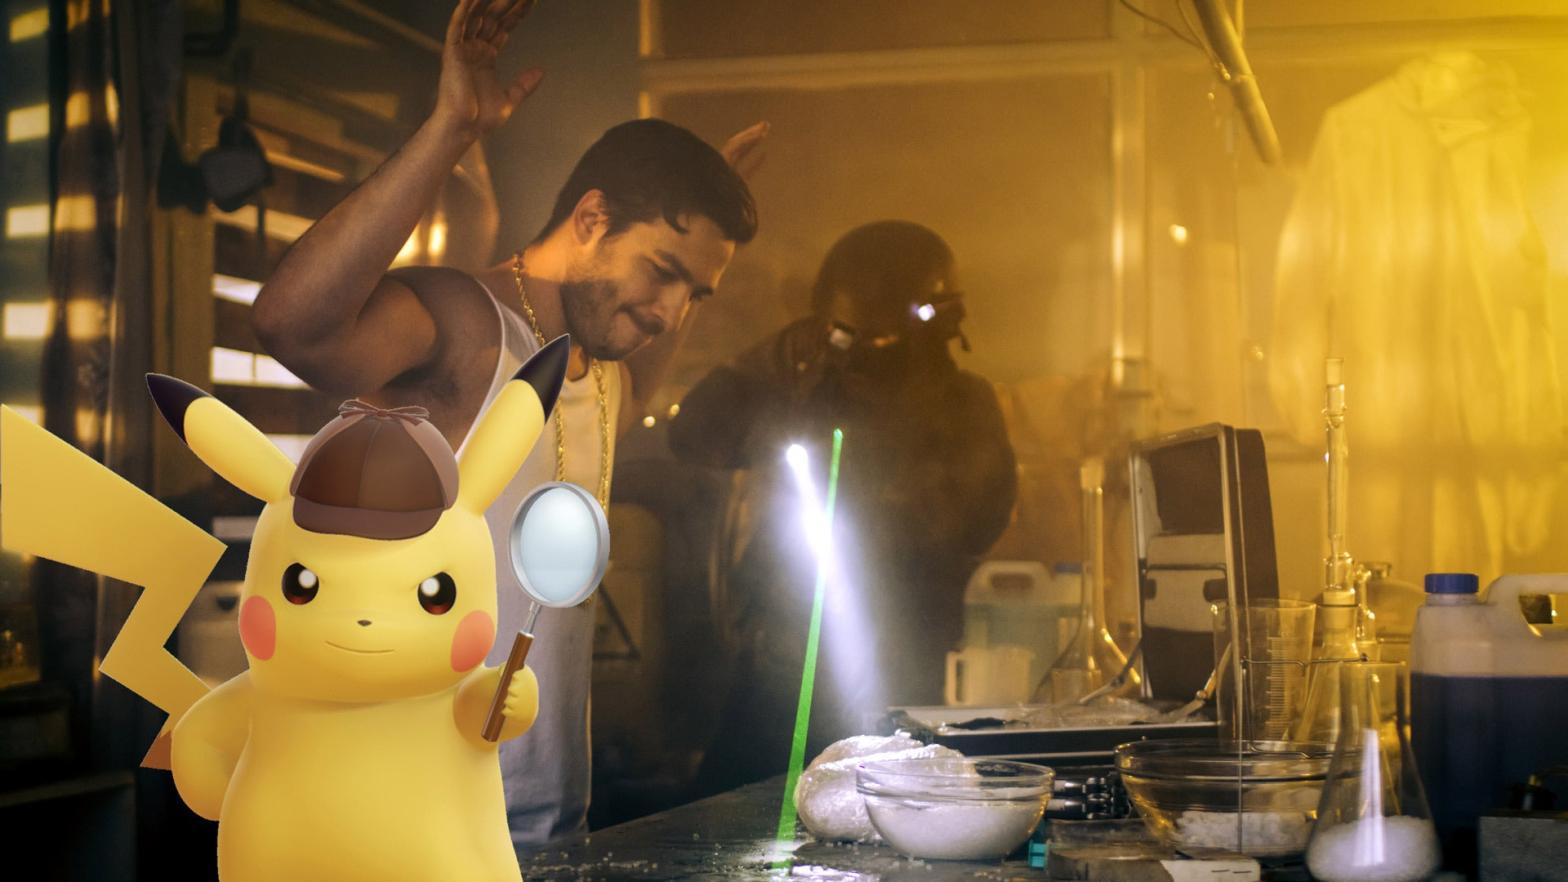 Hold it right there, scoundrel. (Image: Gorodenkoff / Pokémon / Kotaku, Getty Images)